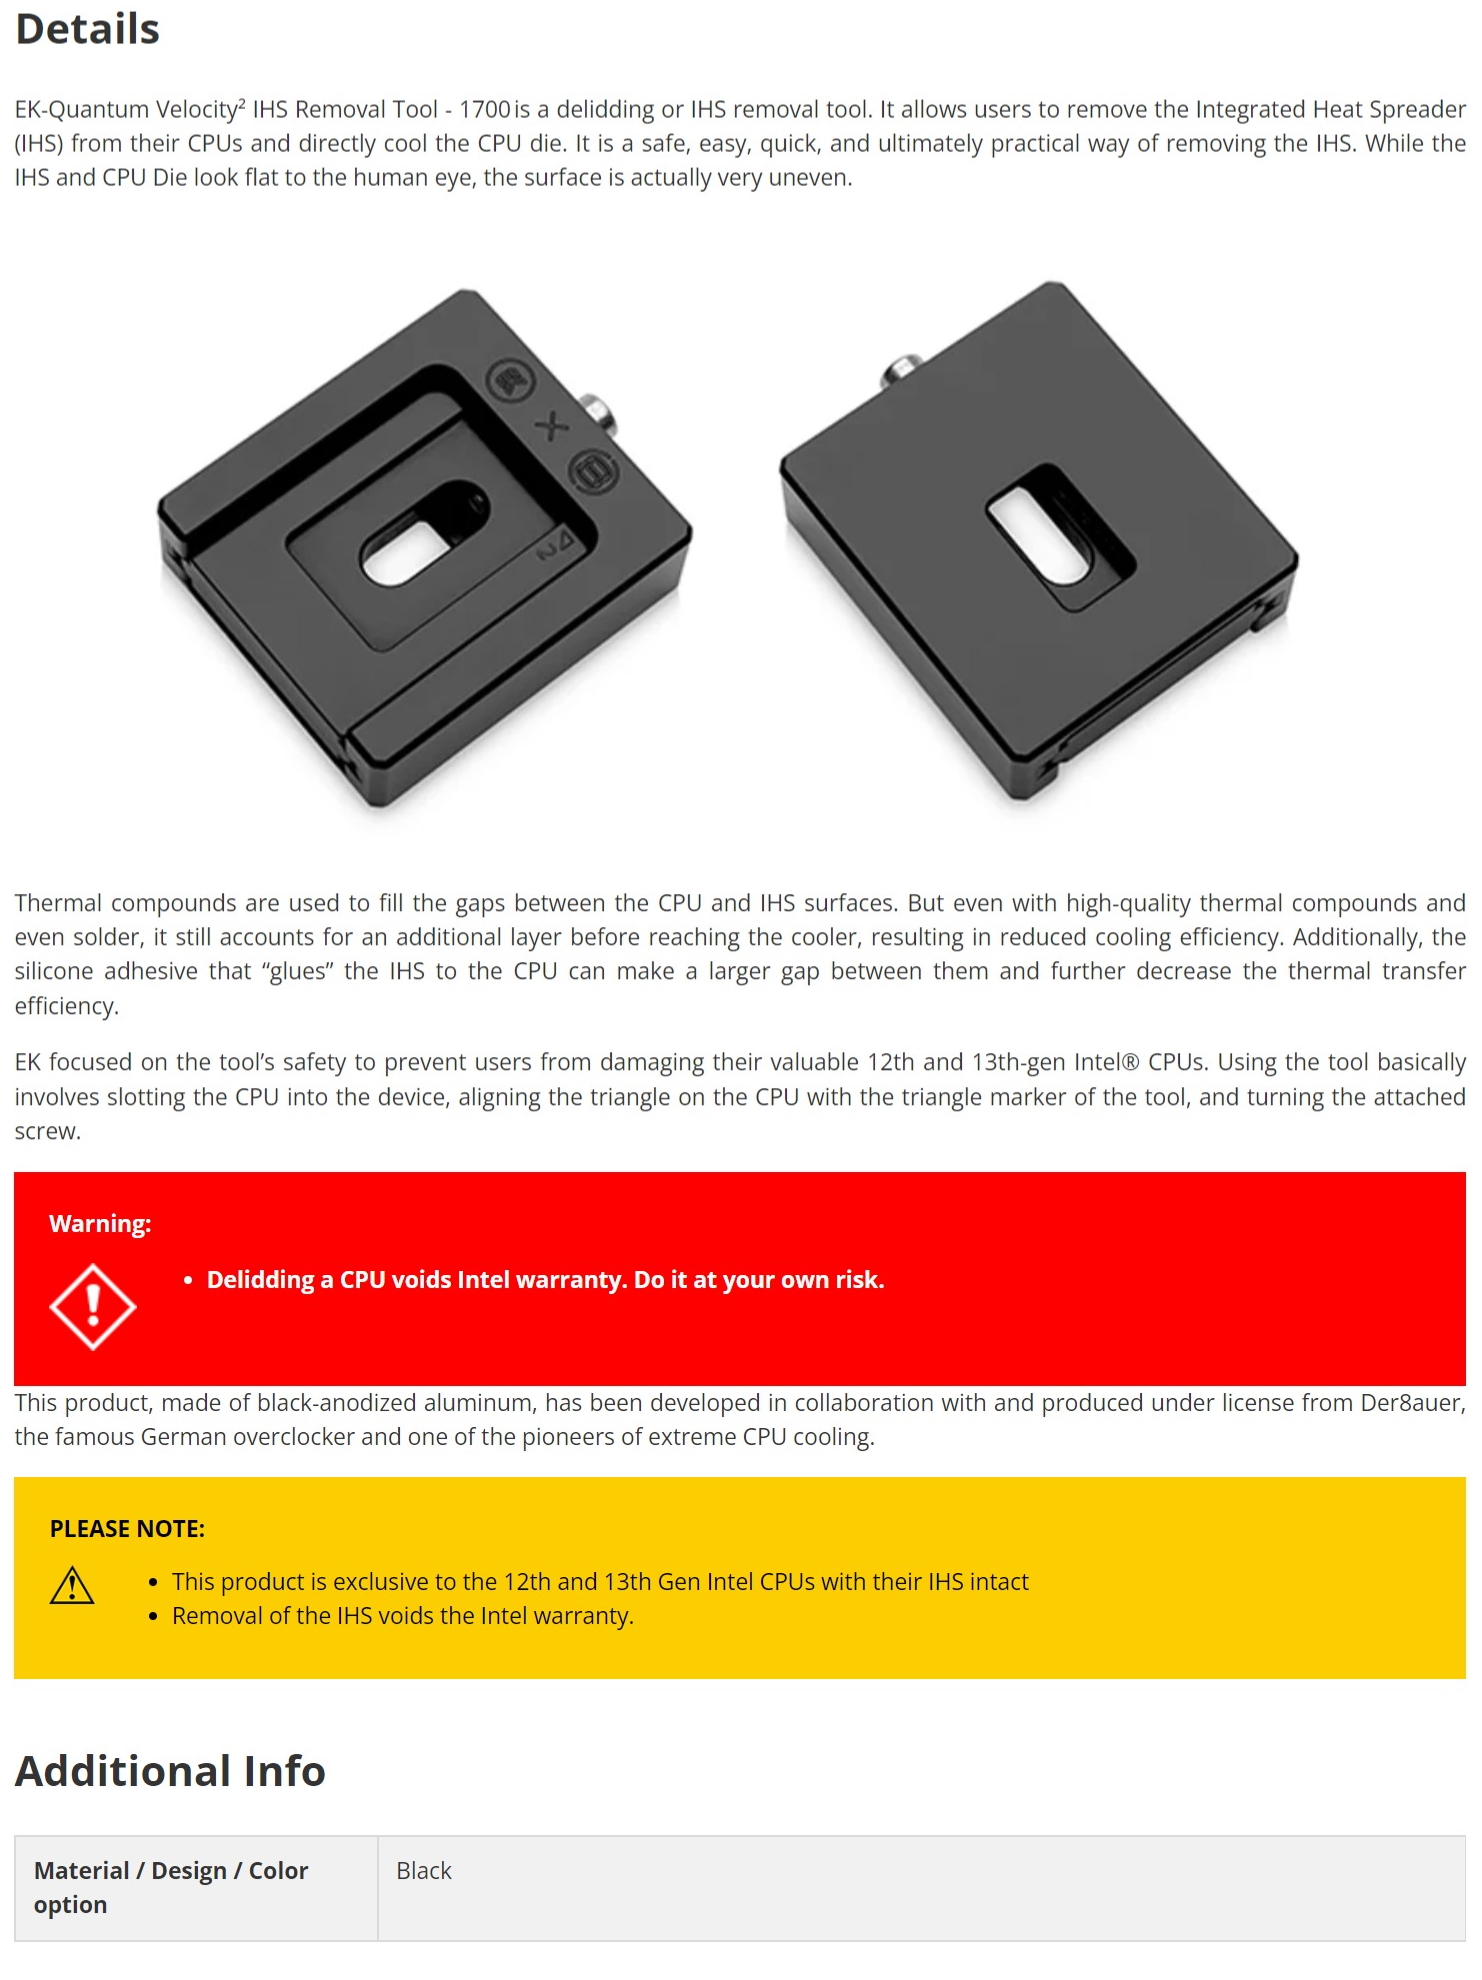 A large marketing image providing additional information about the product EK Quantum Velocity2 Intel 1700 IHS Removal Tool - Additional alt info not provided